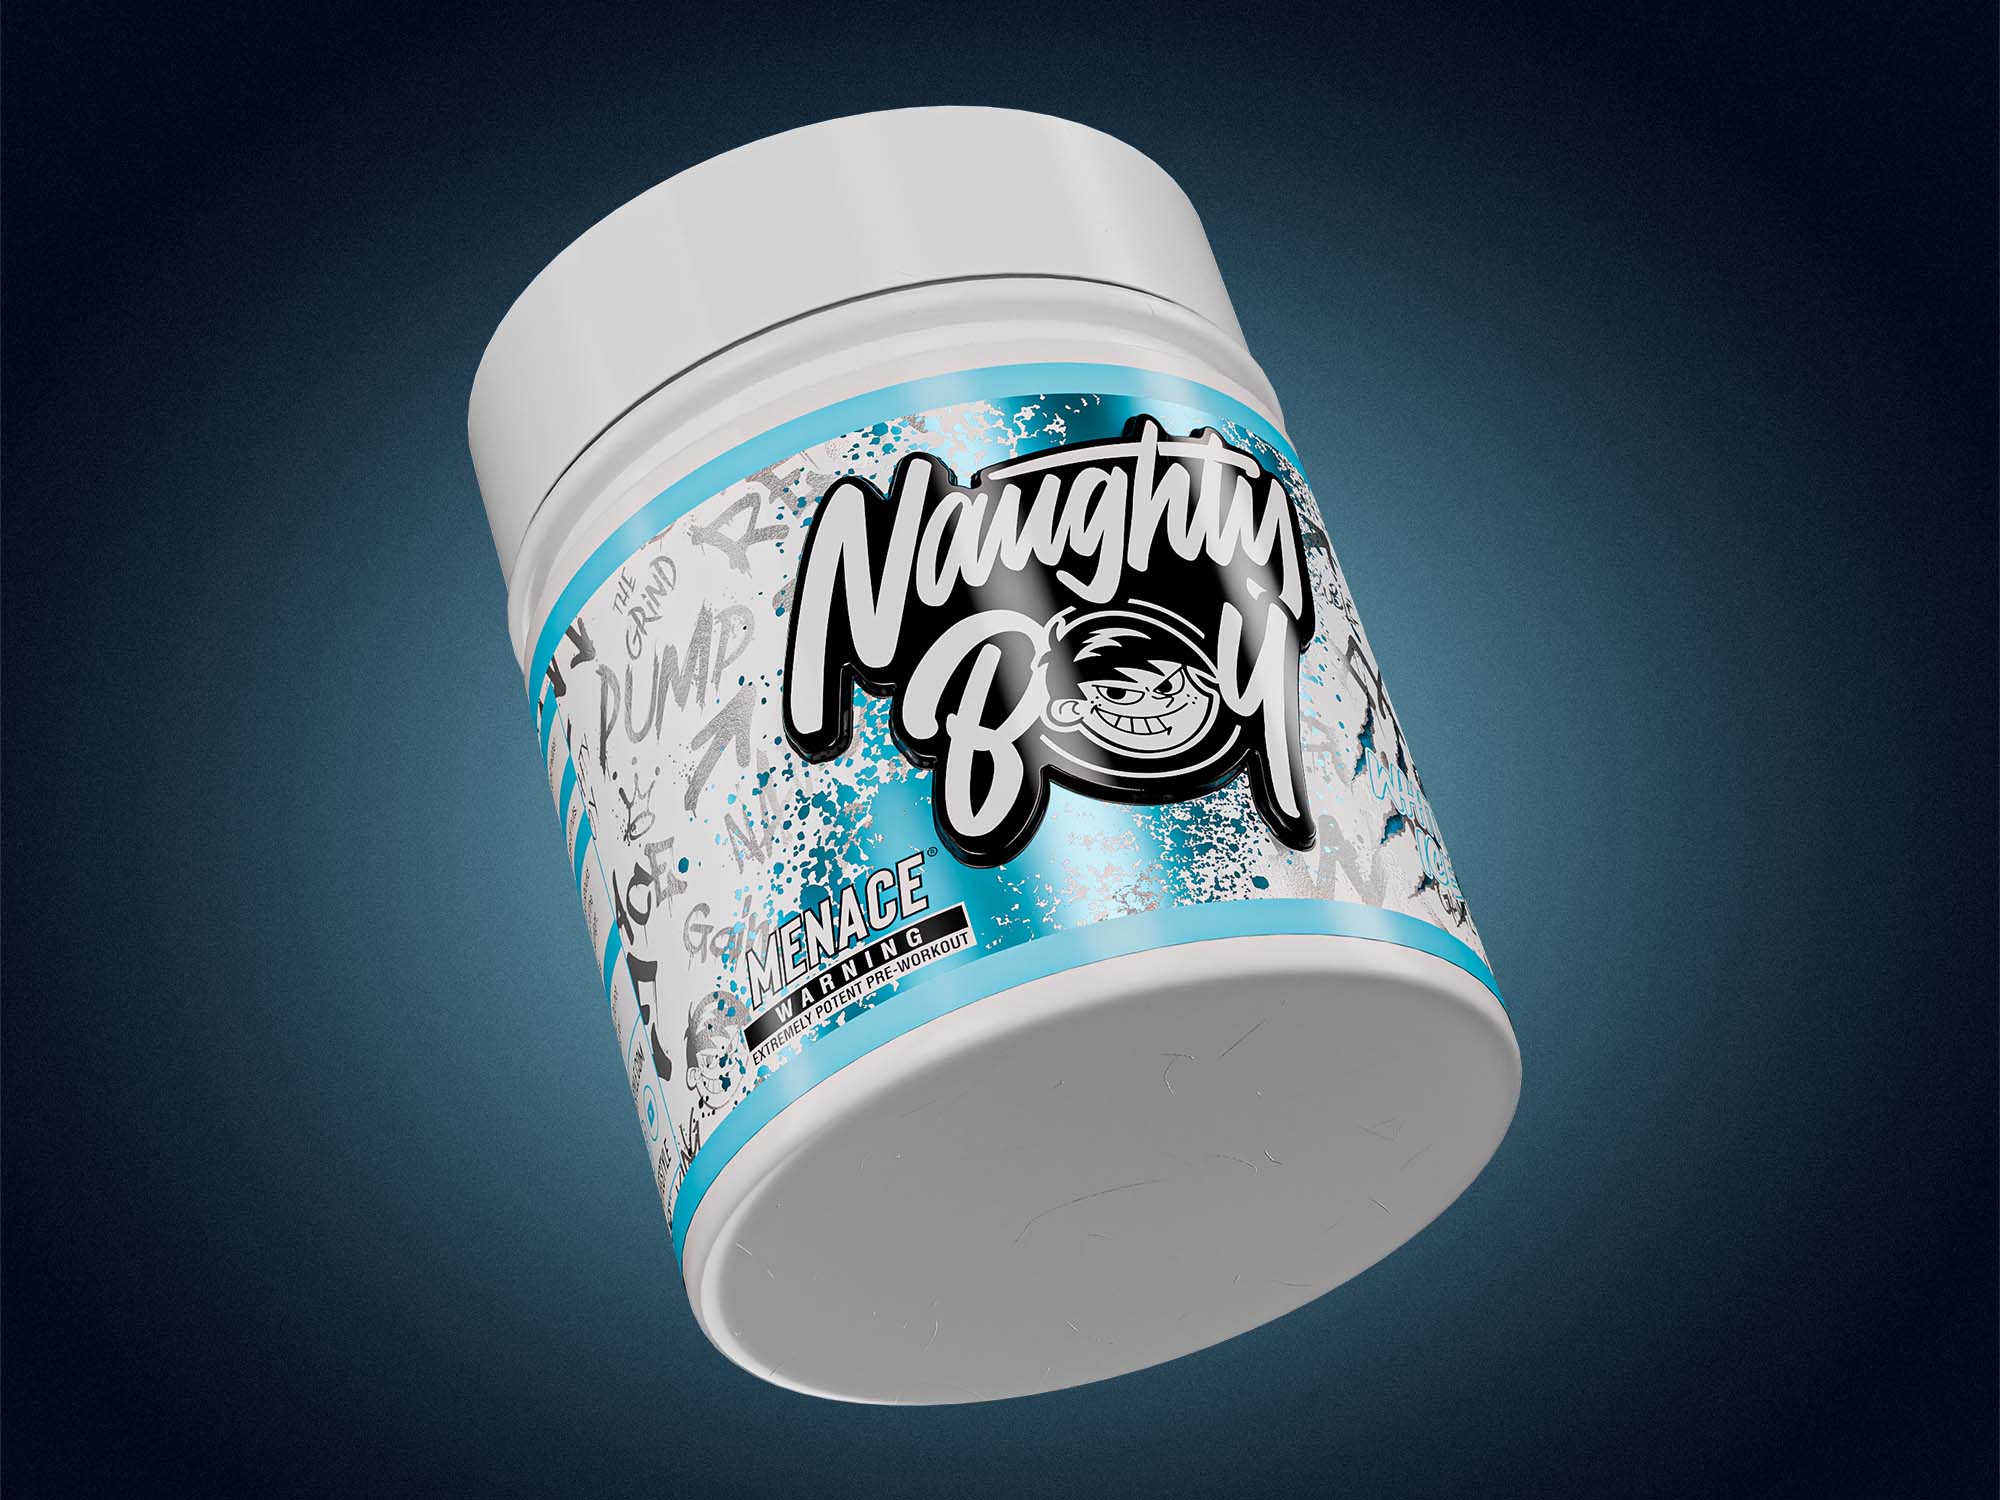 PreWorkout Supplement 3D Product Rendering Naughty Boy